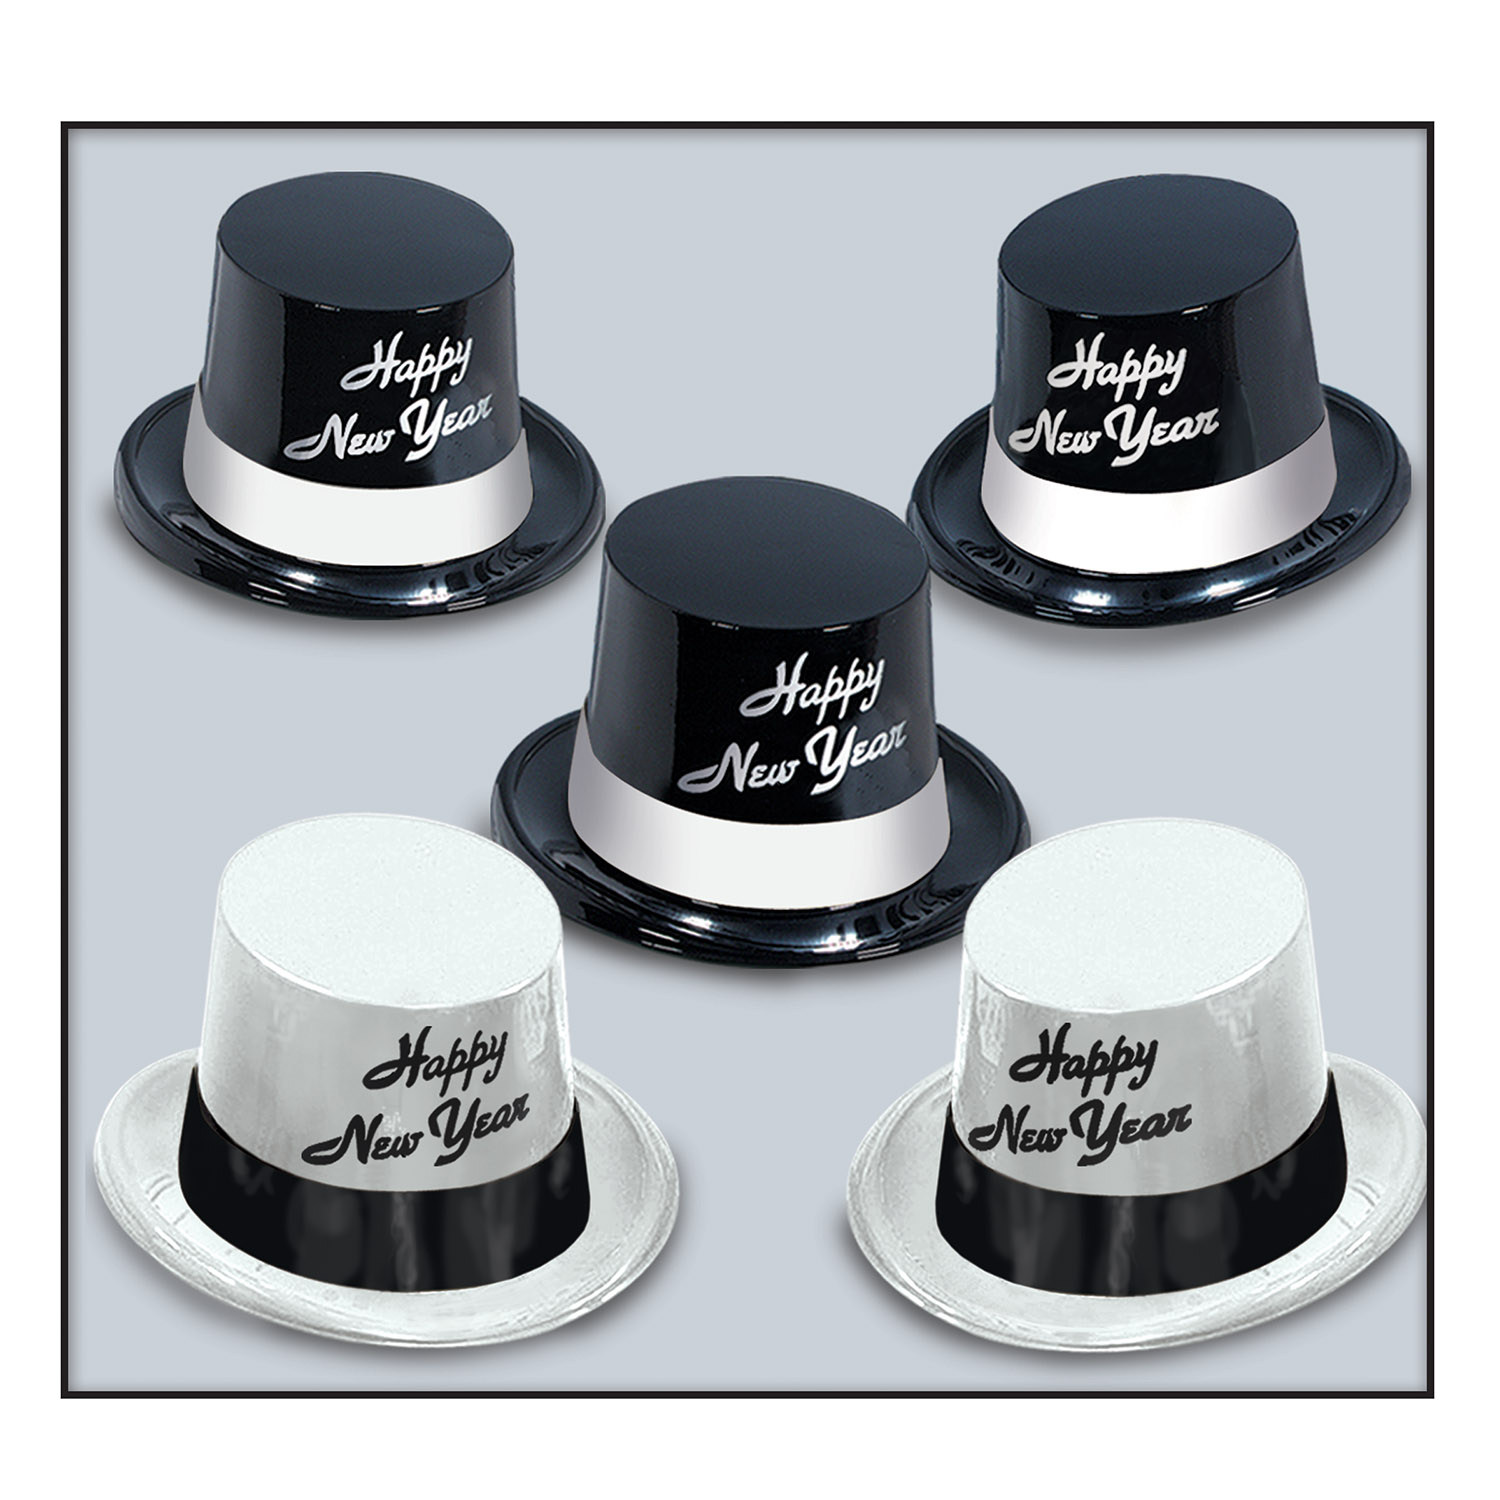 White and black legacy toppers made out of molded plastic. White hats have black bands and lettering while the black hats have white bands and lettering. 